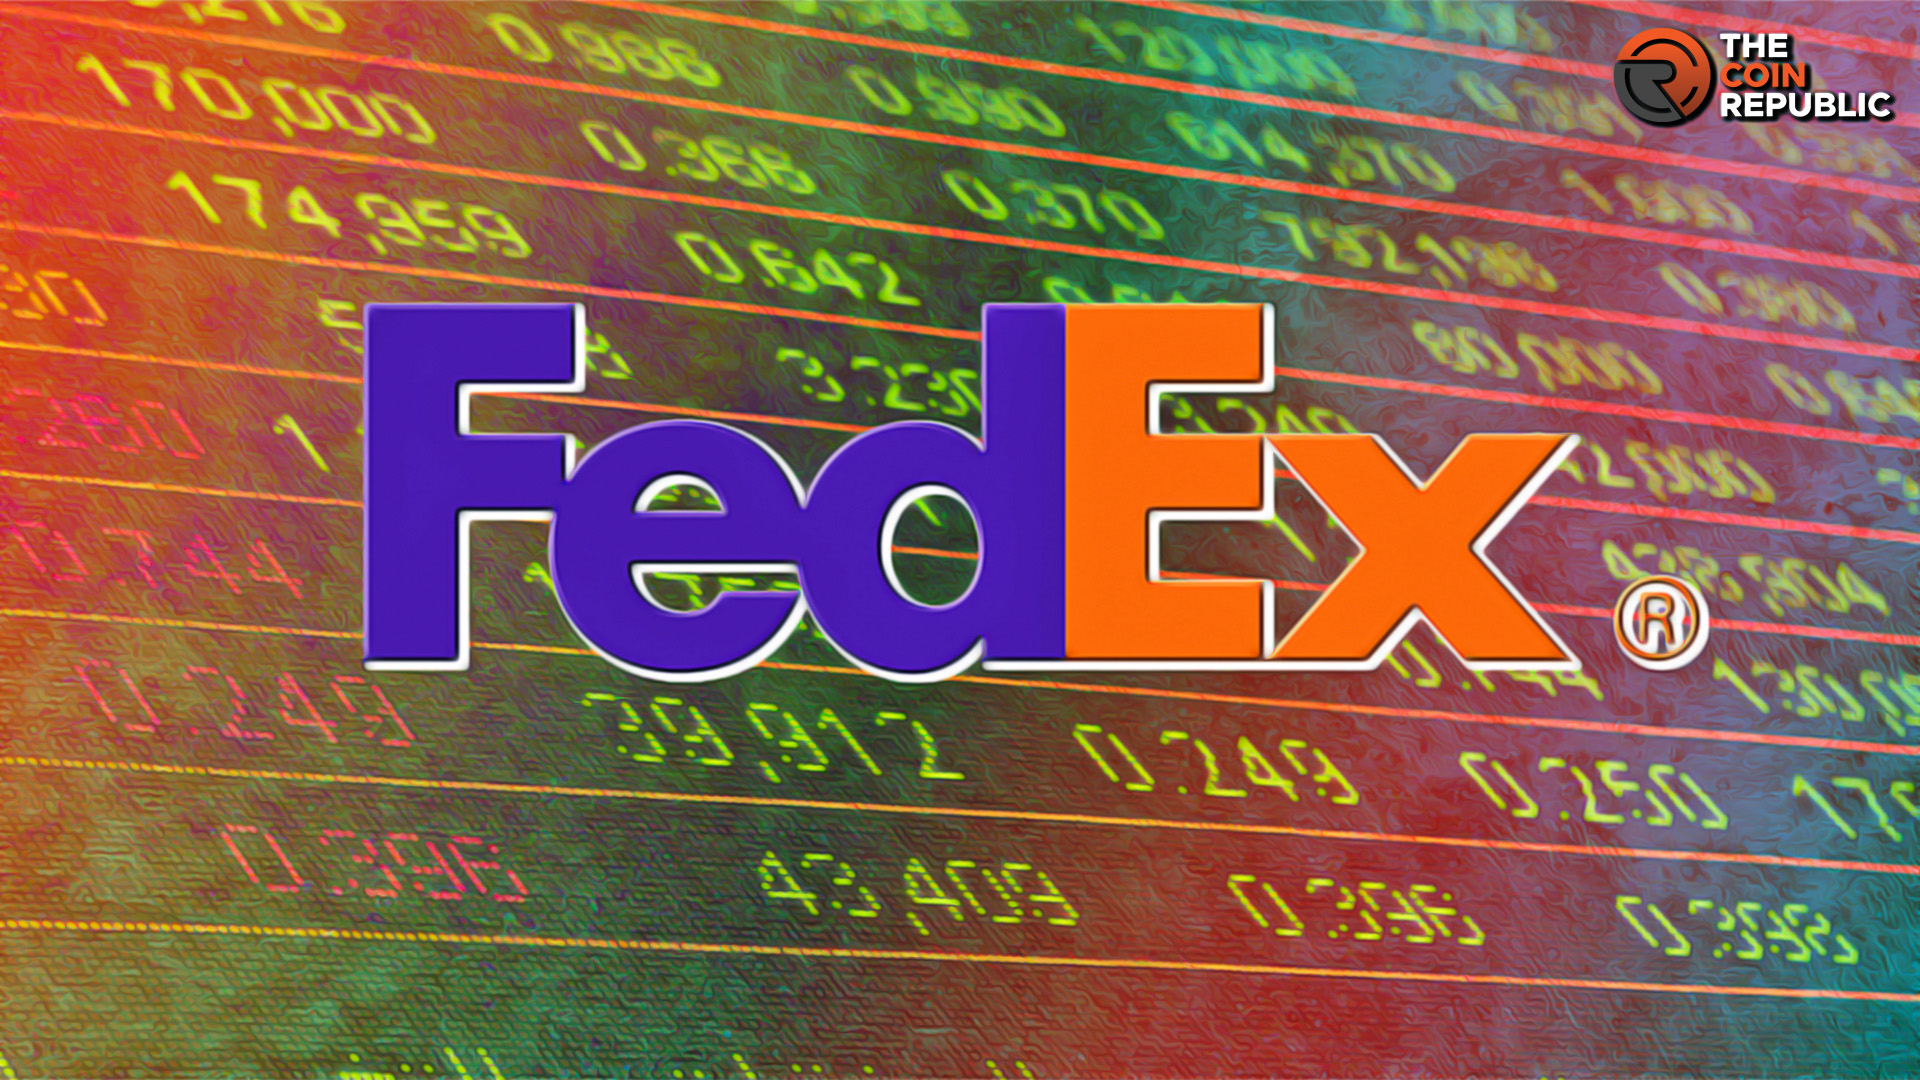 FDX Stock Price Nears $250, Will It Continue to Outperform?